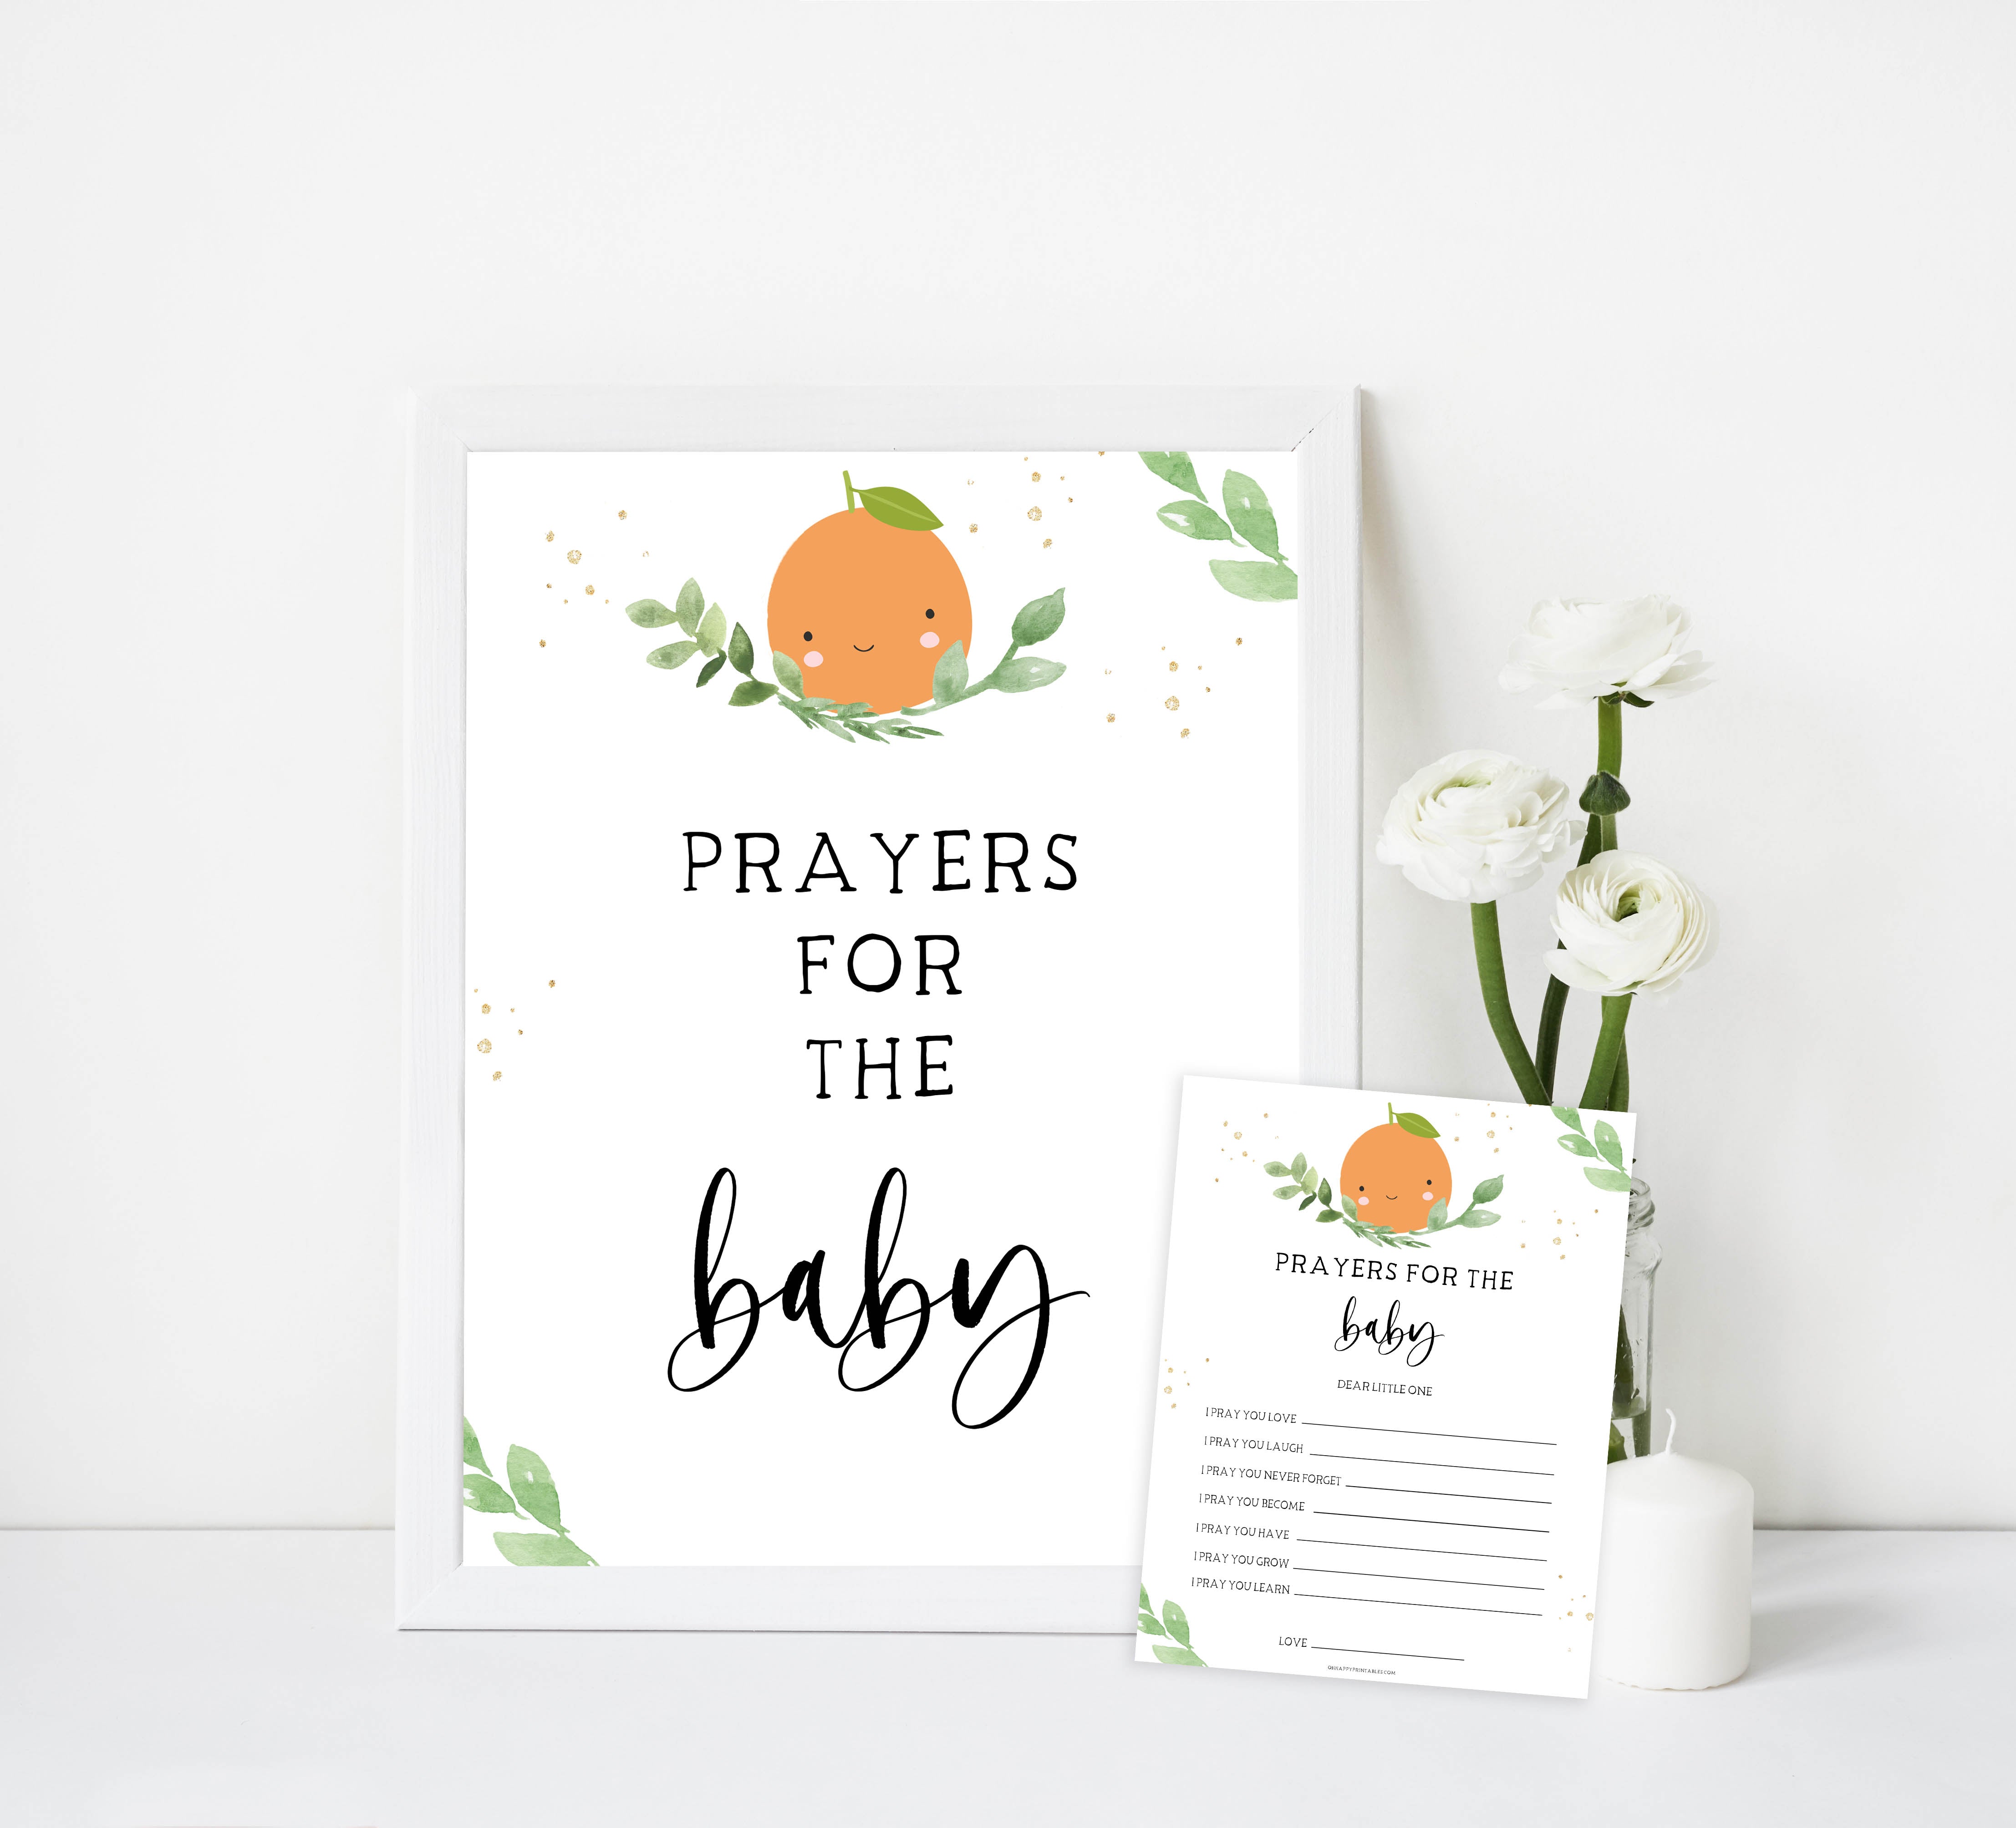 prayers for the baby game, Printable baby shower games, little cutie baby games, baby shower games, fun baby shower ideas, top baby shower ideas, little cutie baby shower, baby shower games, fun little cutie baby shower ideas